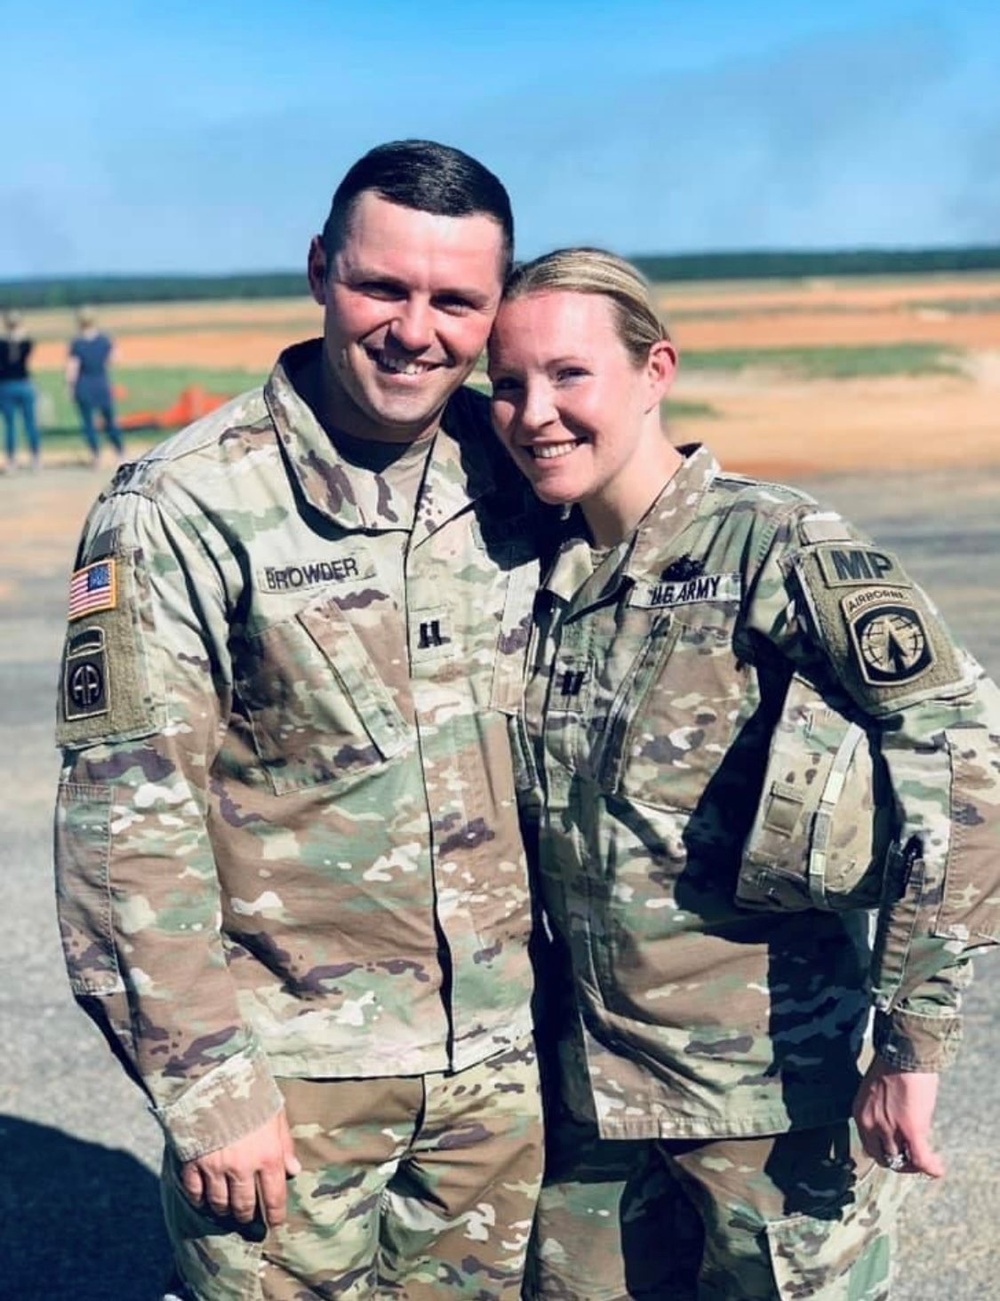 Capt. Jordan Browder poses with her Husband after receiving Jump Wings